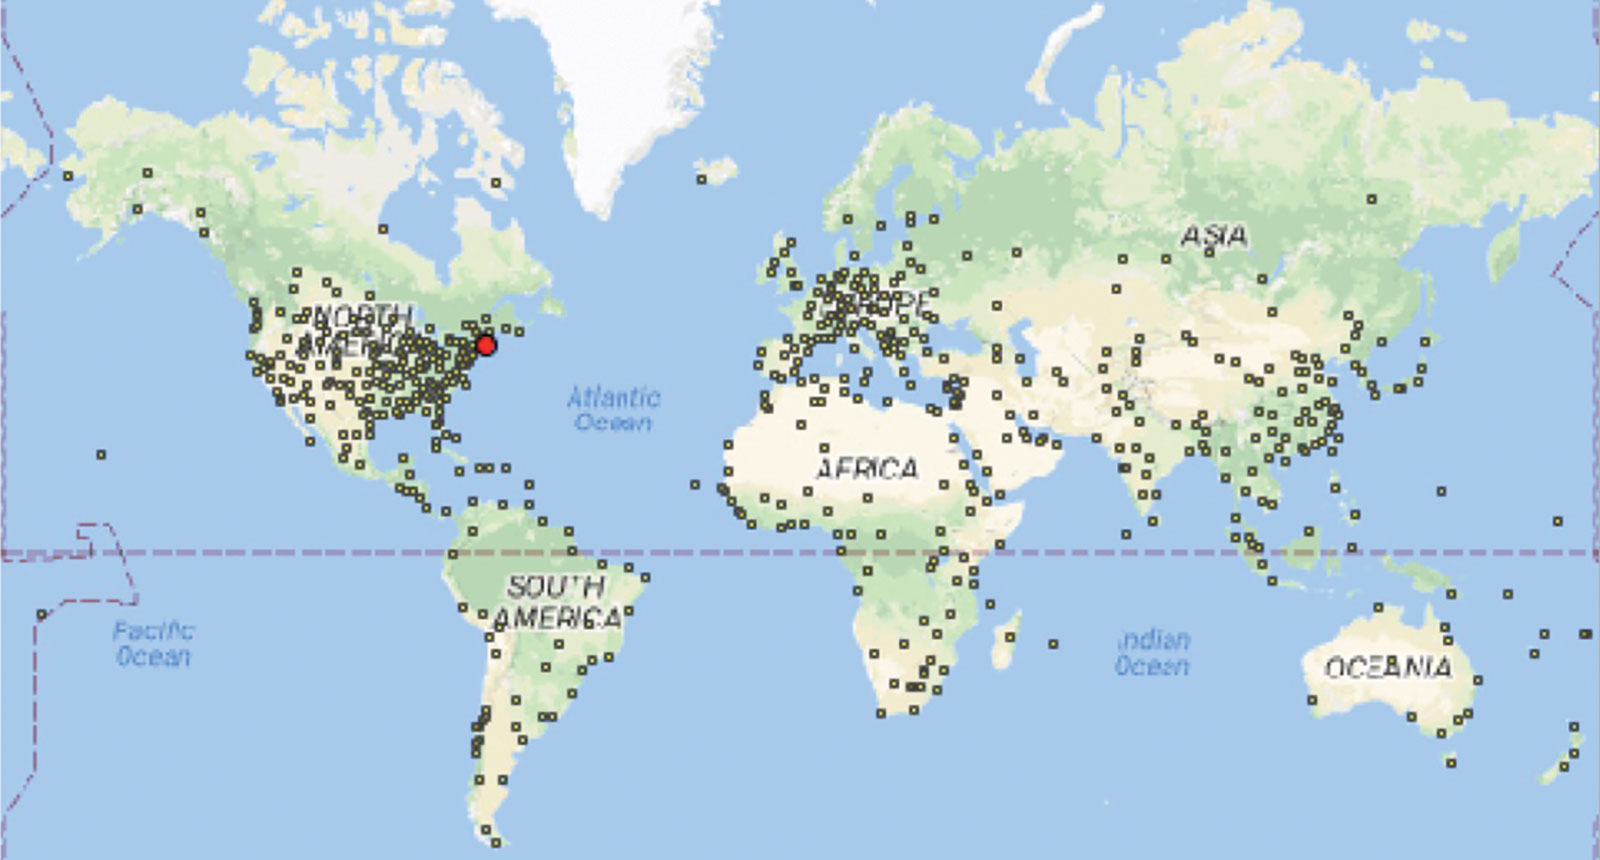 Energy3D covers over 600 regions in 190 countries.